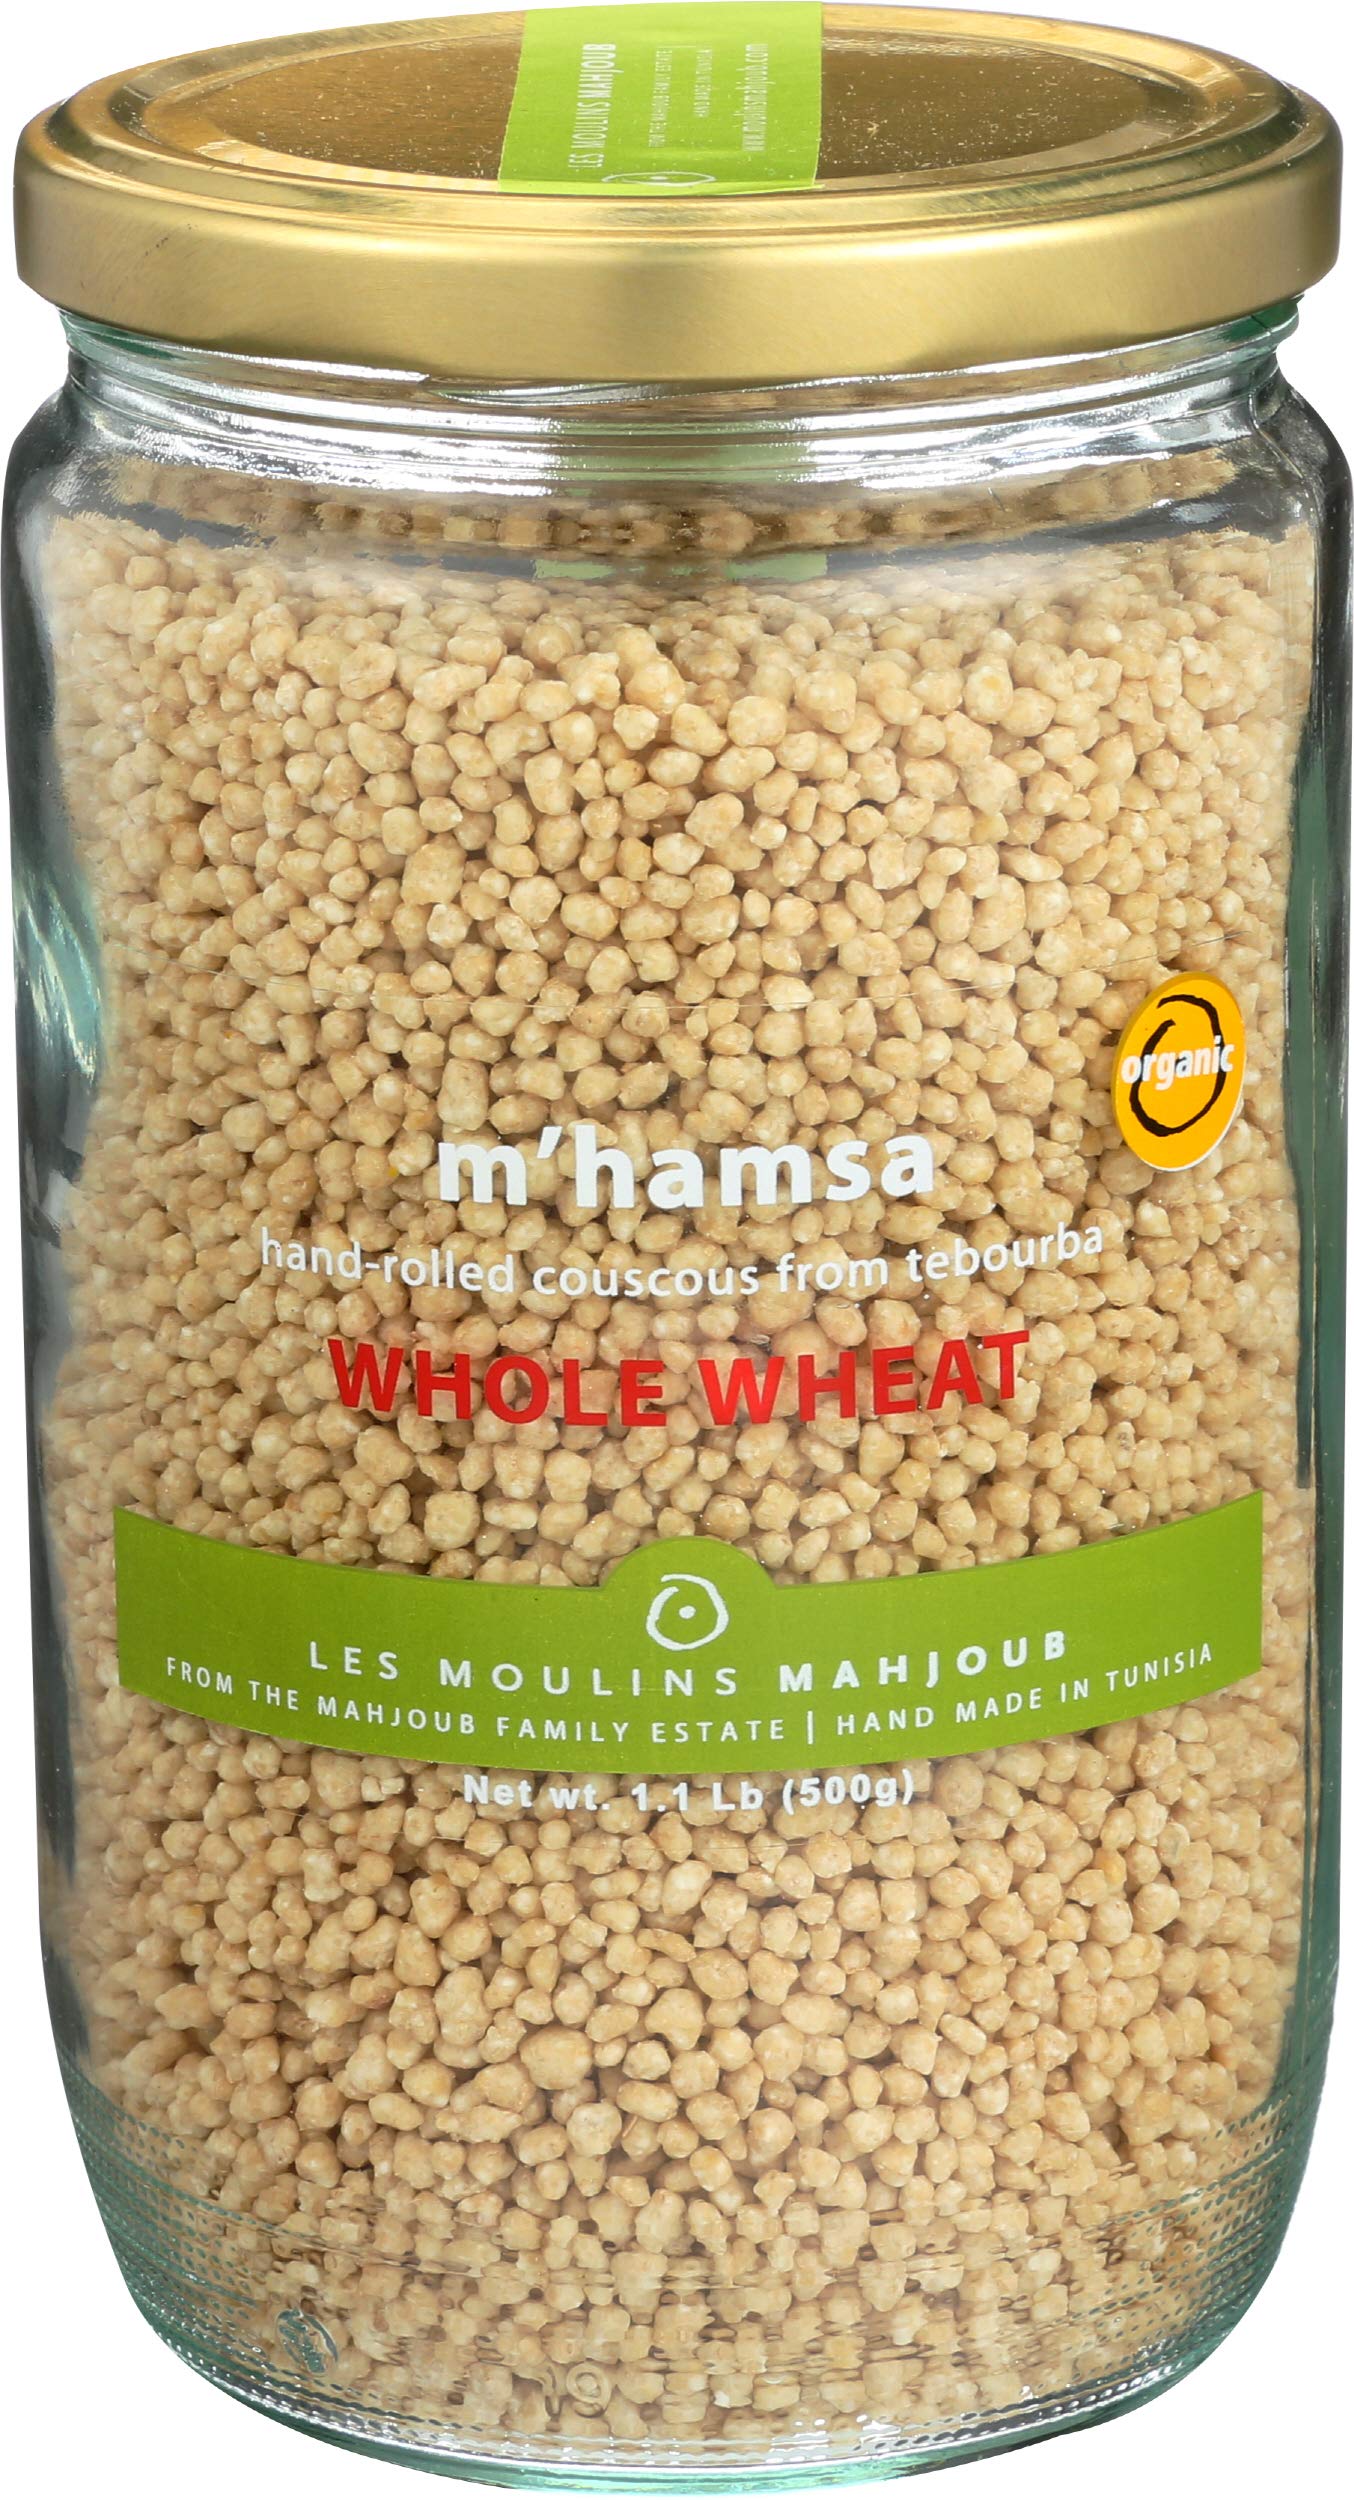 Les Moulins Mahjoub Whole Wheat Hand rolled Couscous Organic 500g 12ct